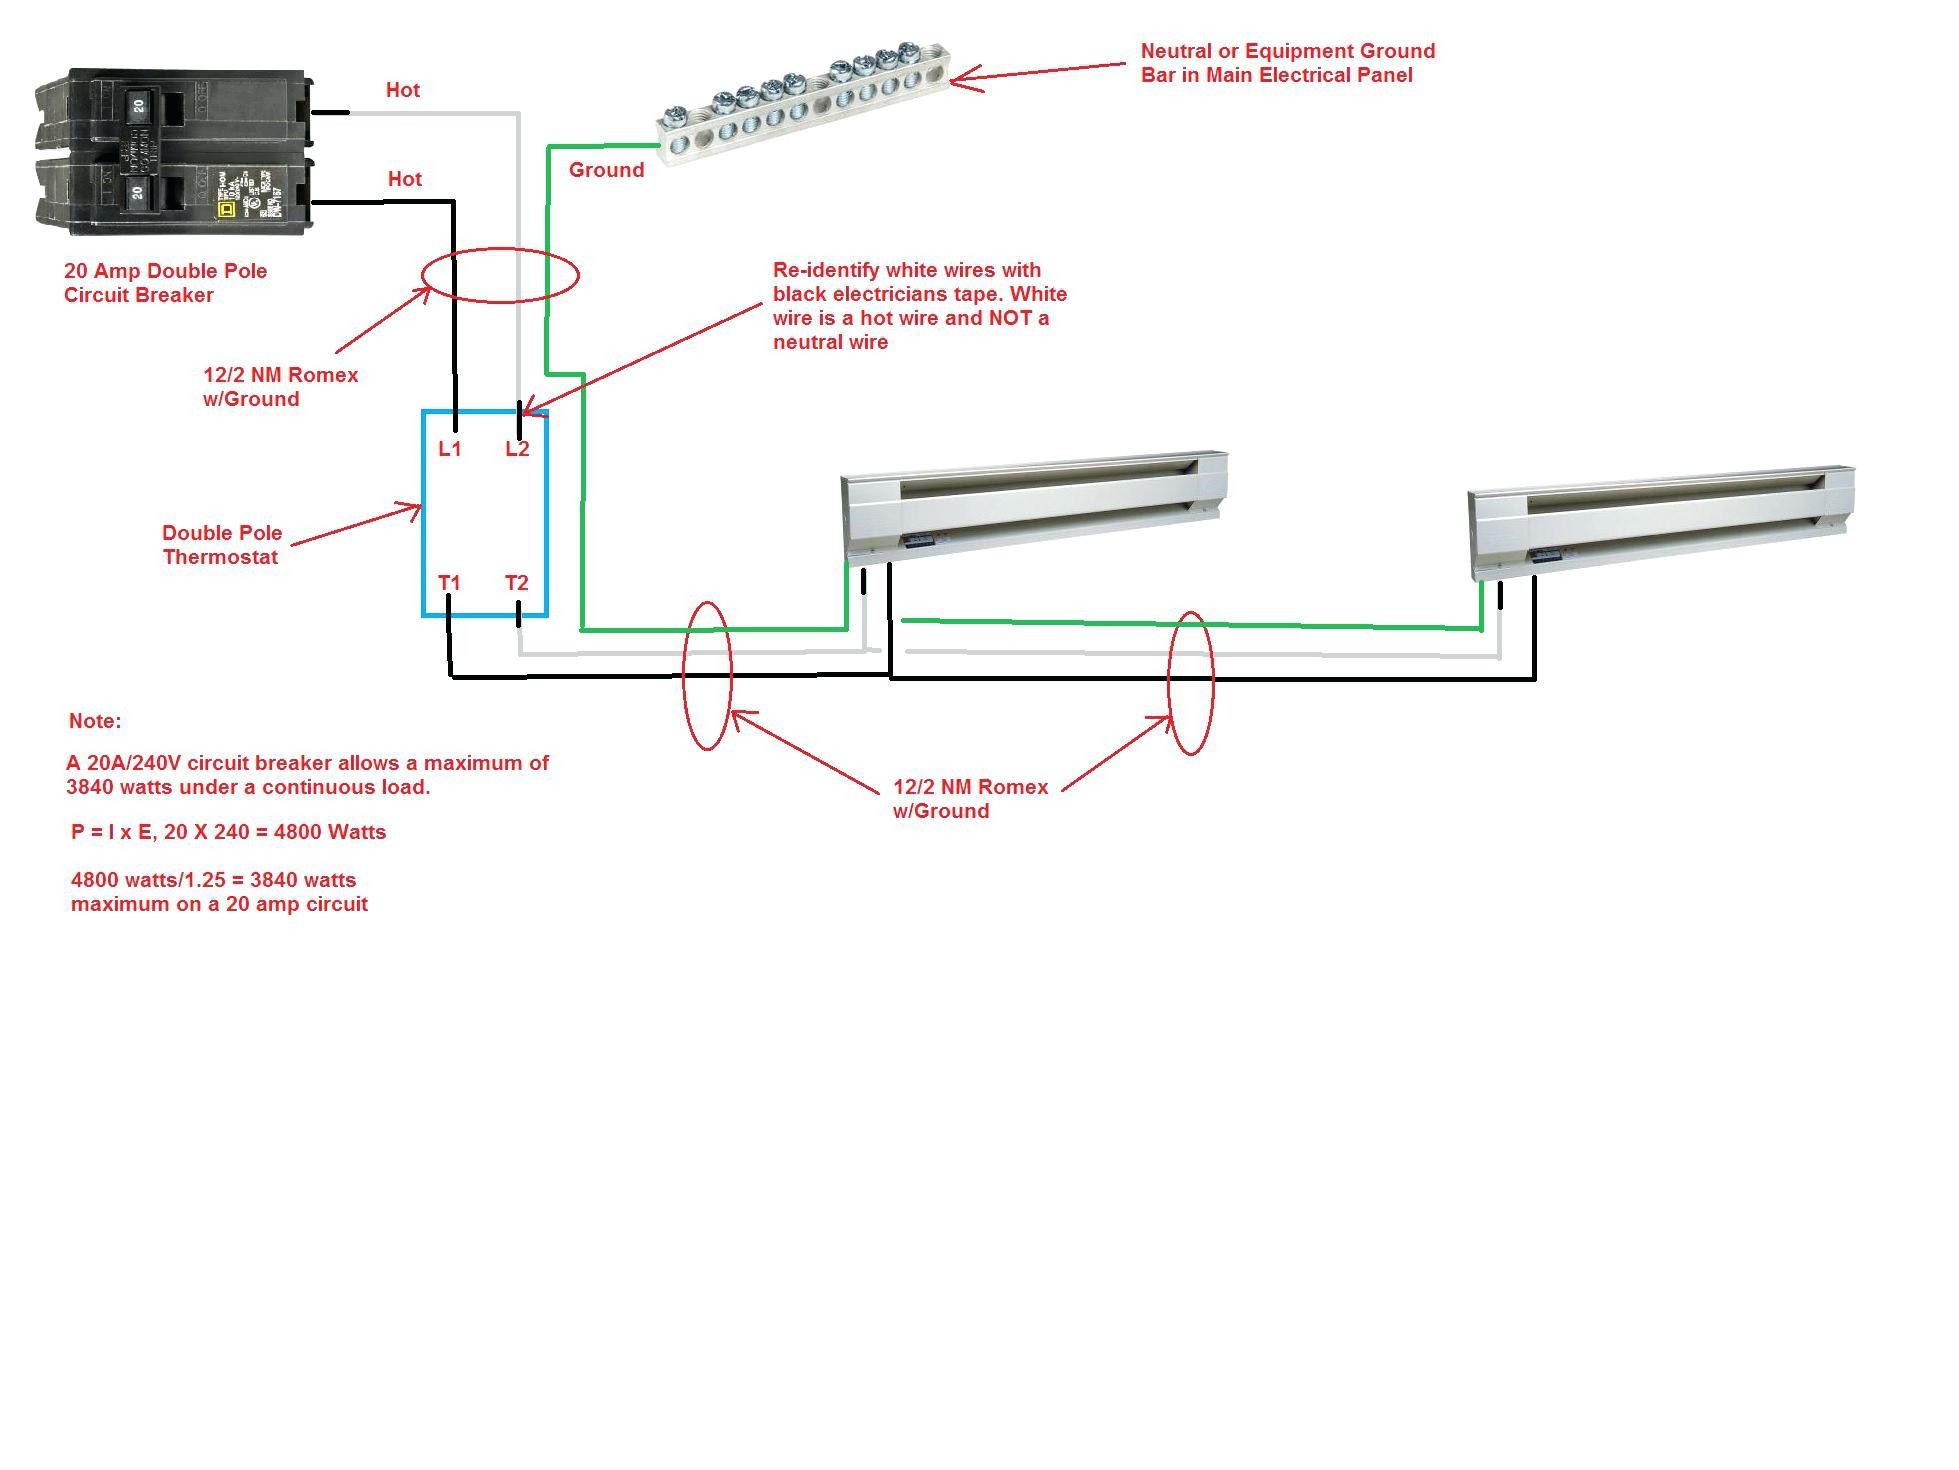 Double Pole thermostat Wiring Diagram Double Pole thermostat Wiring Diagram 4 Wire Awesome Contemporary